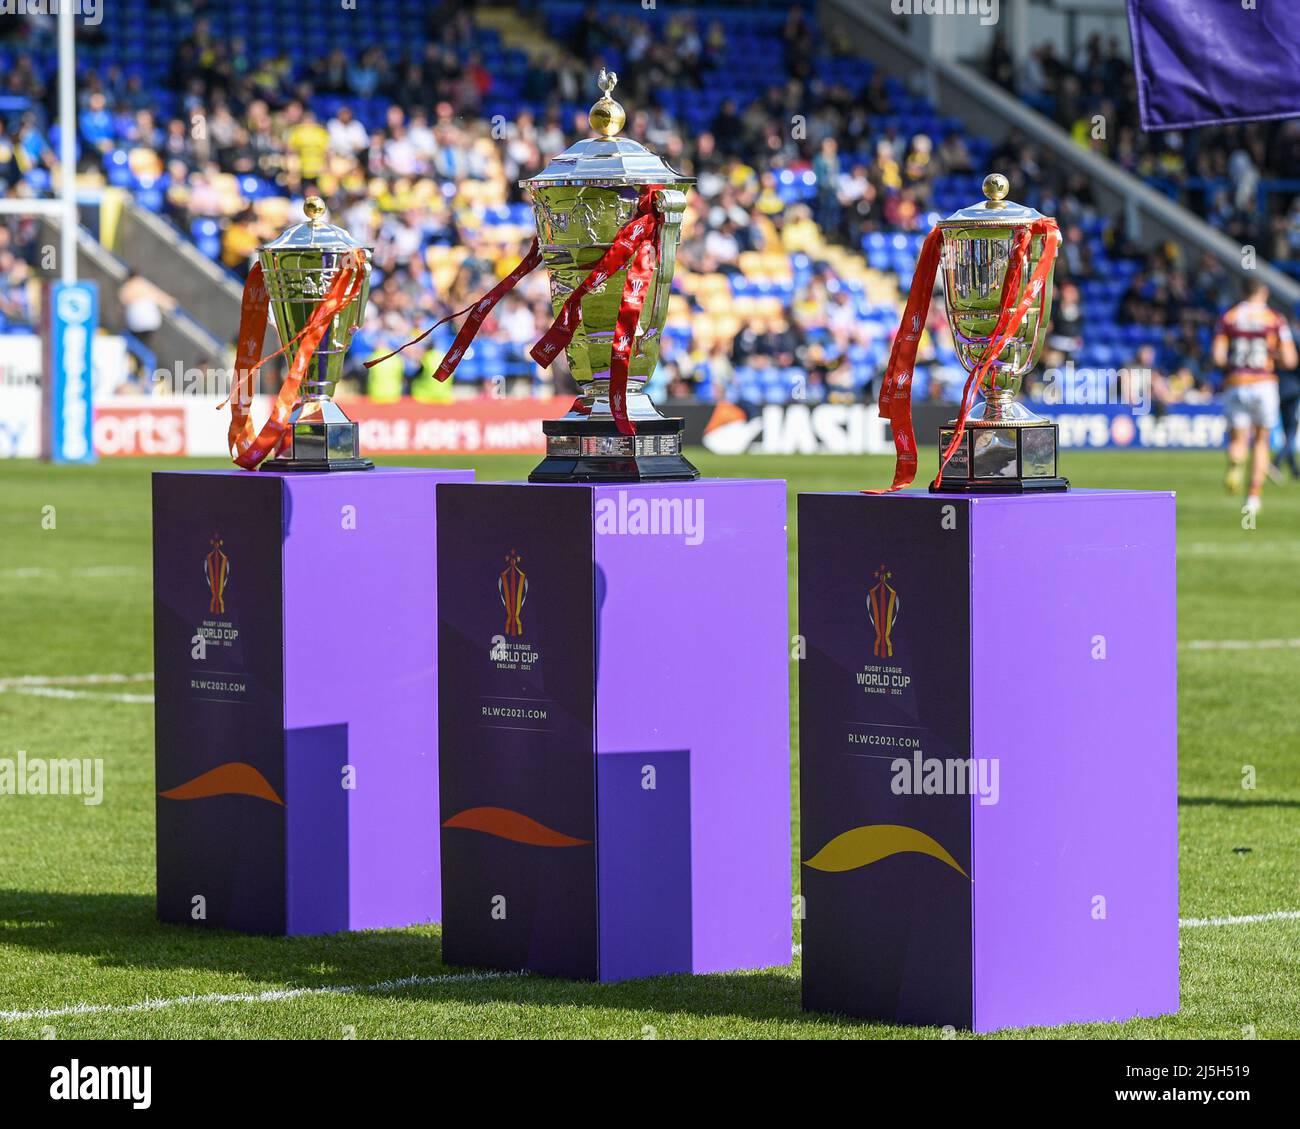 The Rugby League World Cup trophies on display at The Halliwell Jones Stadium Stock Photo